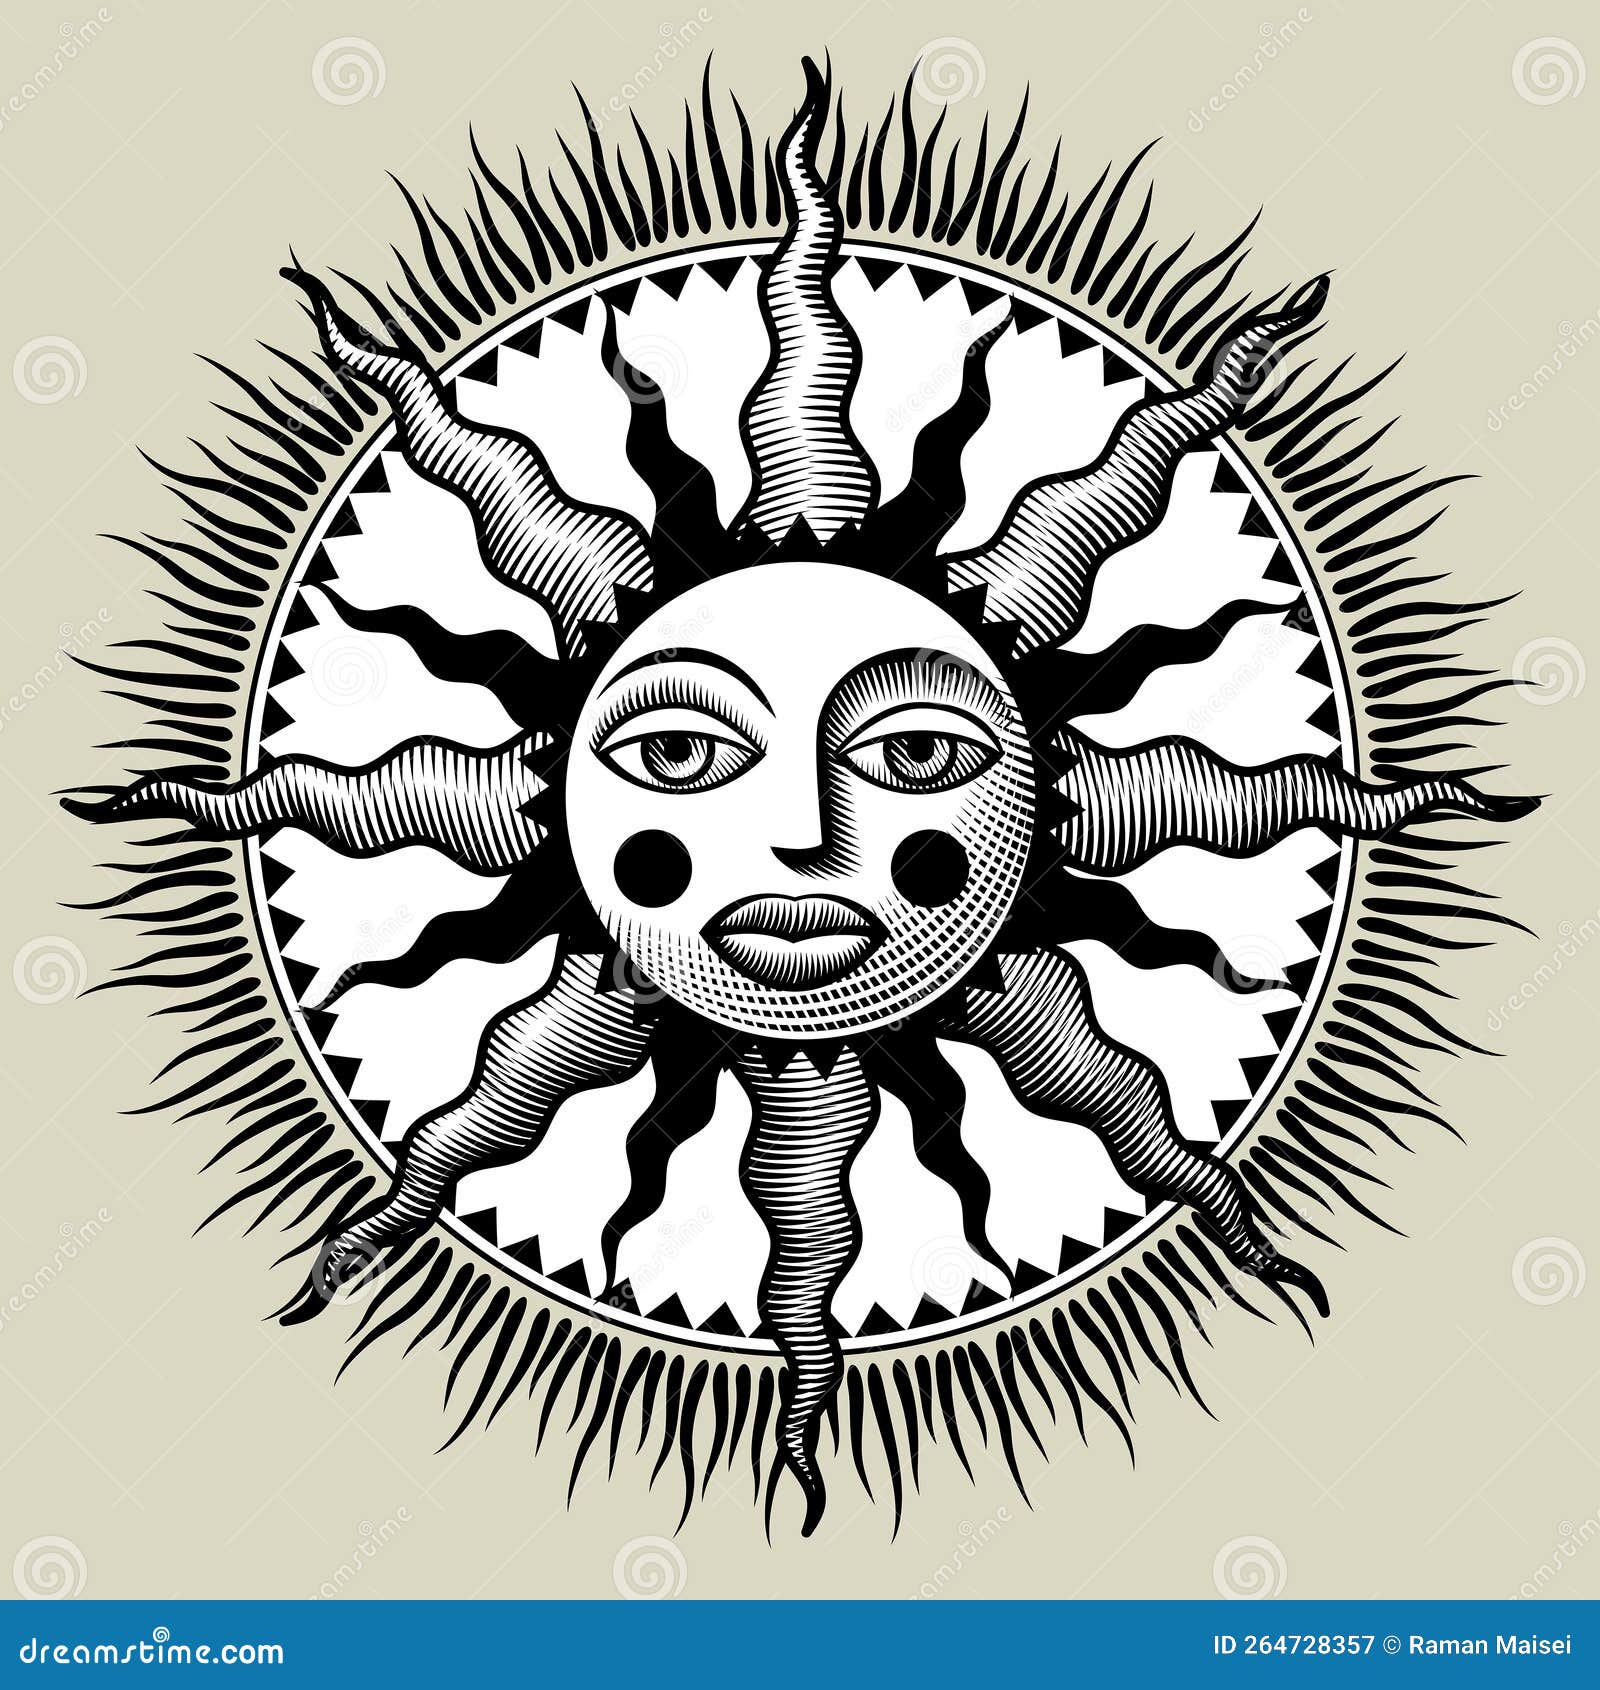 Vintage Engraving Stylized Drawing of Round Decorative Symbol of Sun ...